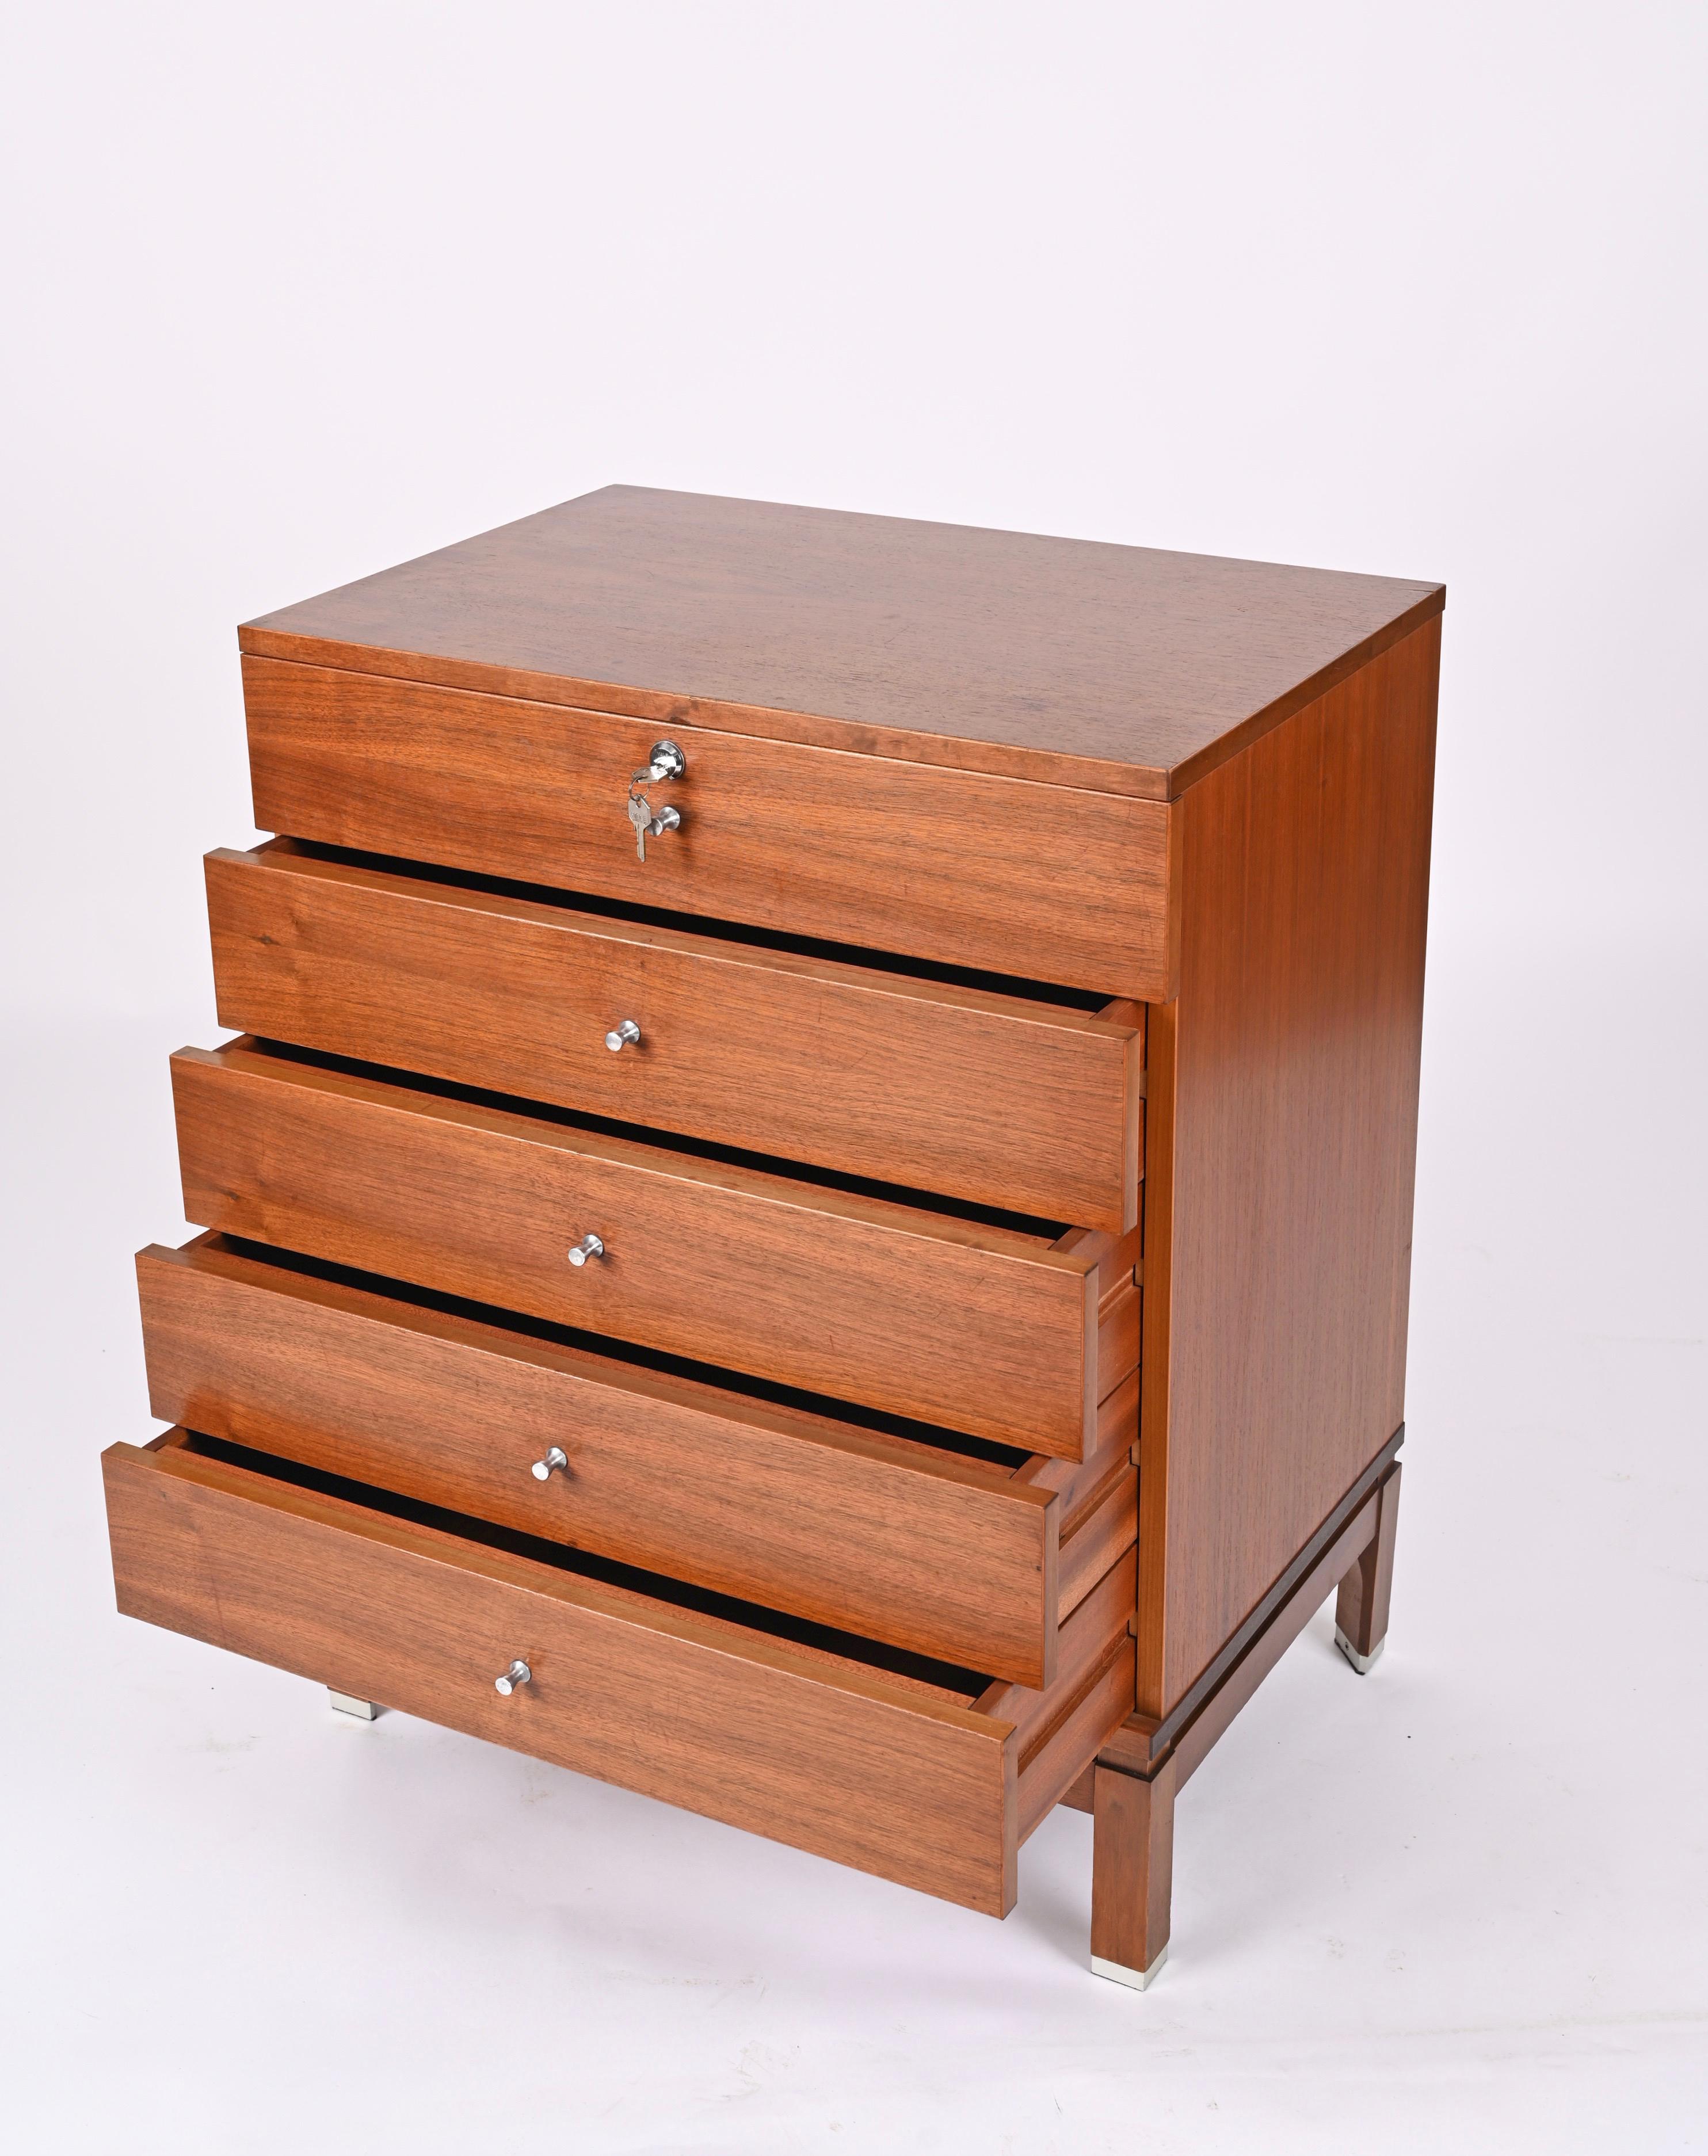 Italian Mid-Century Chest of Drawers in Walnut by Ico Parisi for MIM Roma, Italy 1960s For Sale